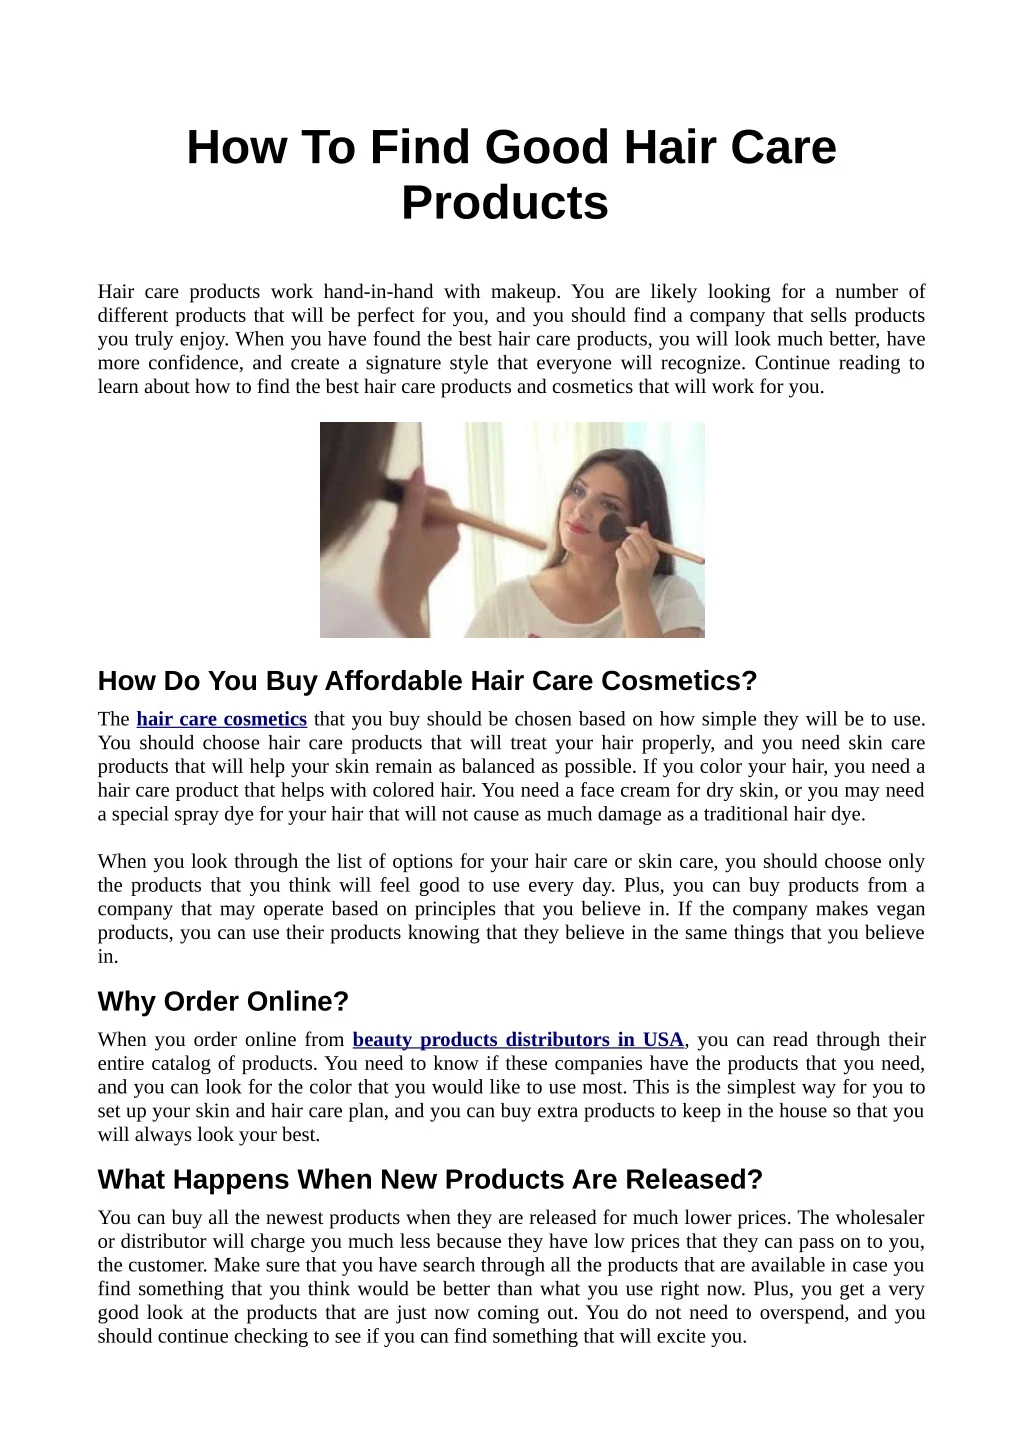 how to find good hair care products